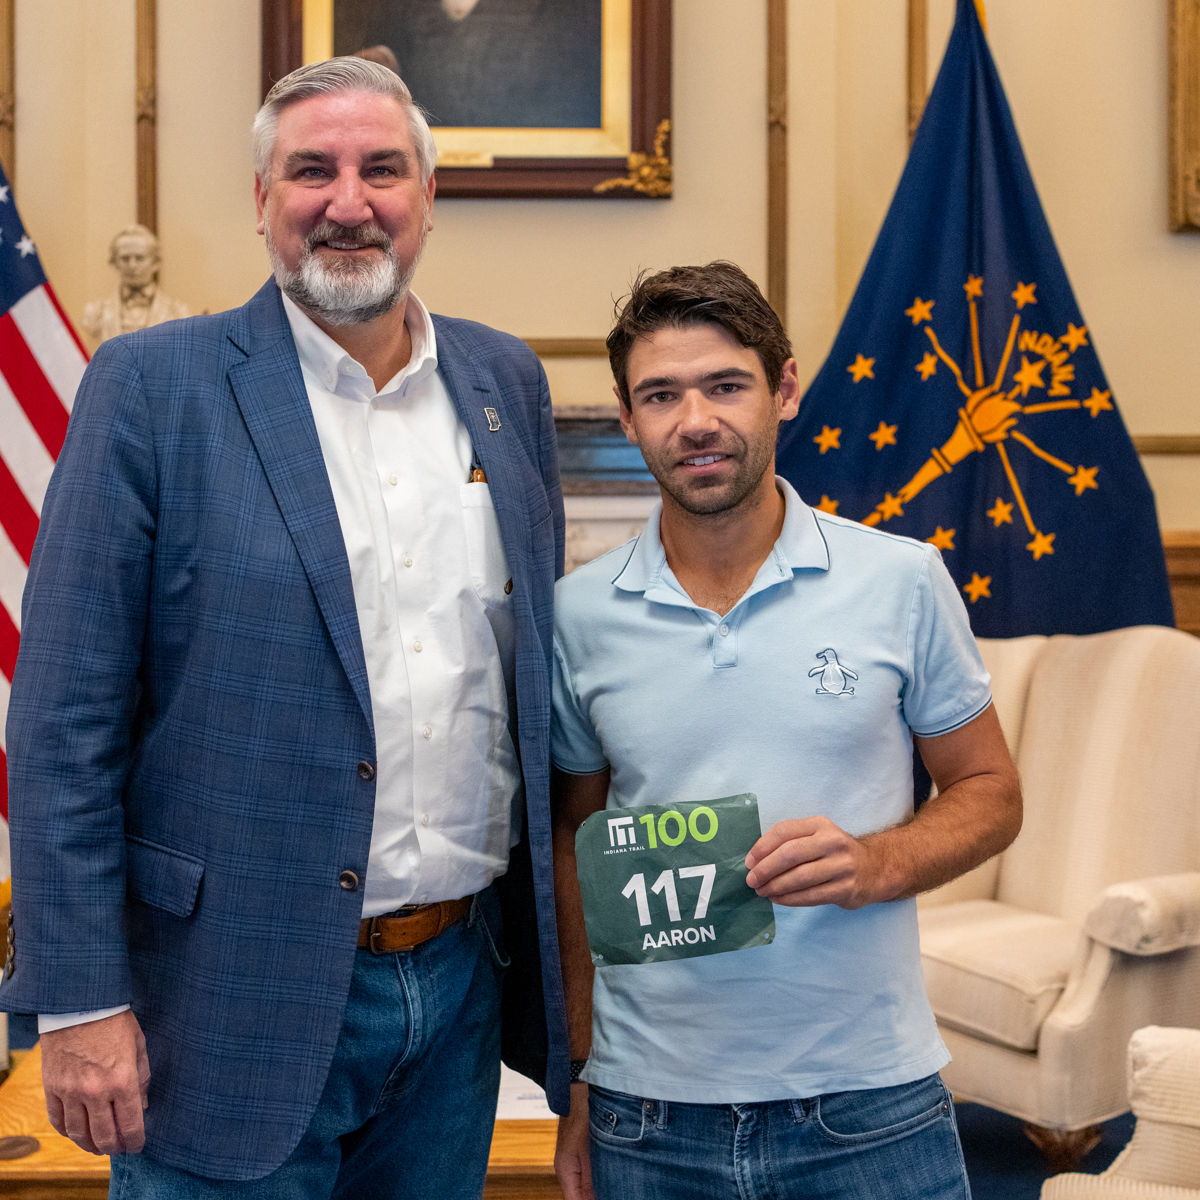 I recently met with Aaron Lipschutz who ran the Indiana Trail 100-mile race at Chain O'Lakes State Park this month. 24+ hours of running is quite the achievement, but to do it all on one of #Indiana's #Nextleveltrails makes it that much sweeter! Congrats! 🏃‍♂️